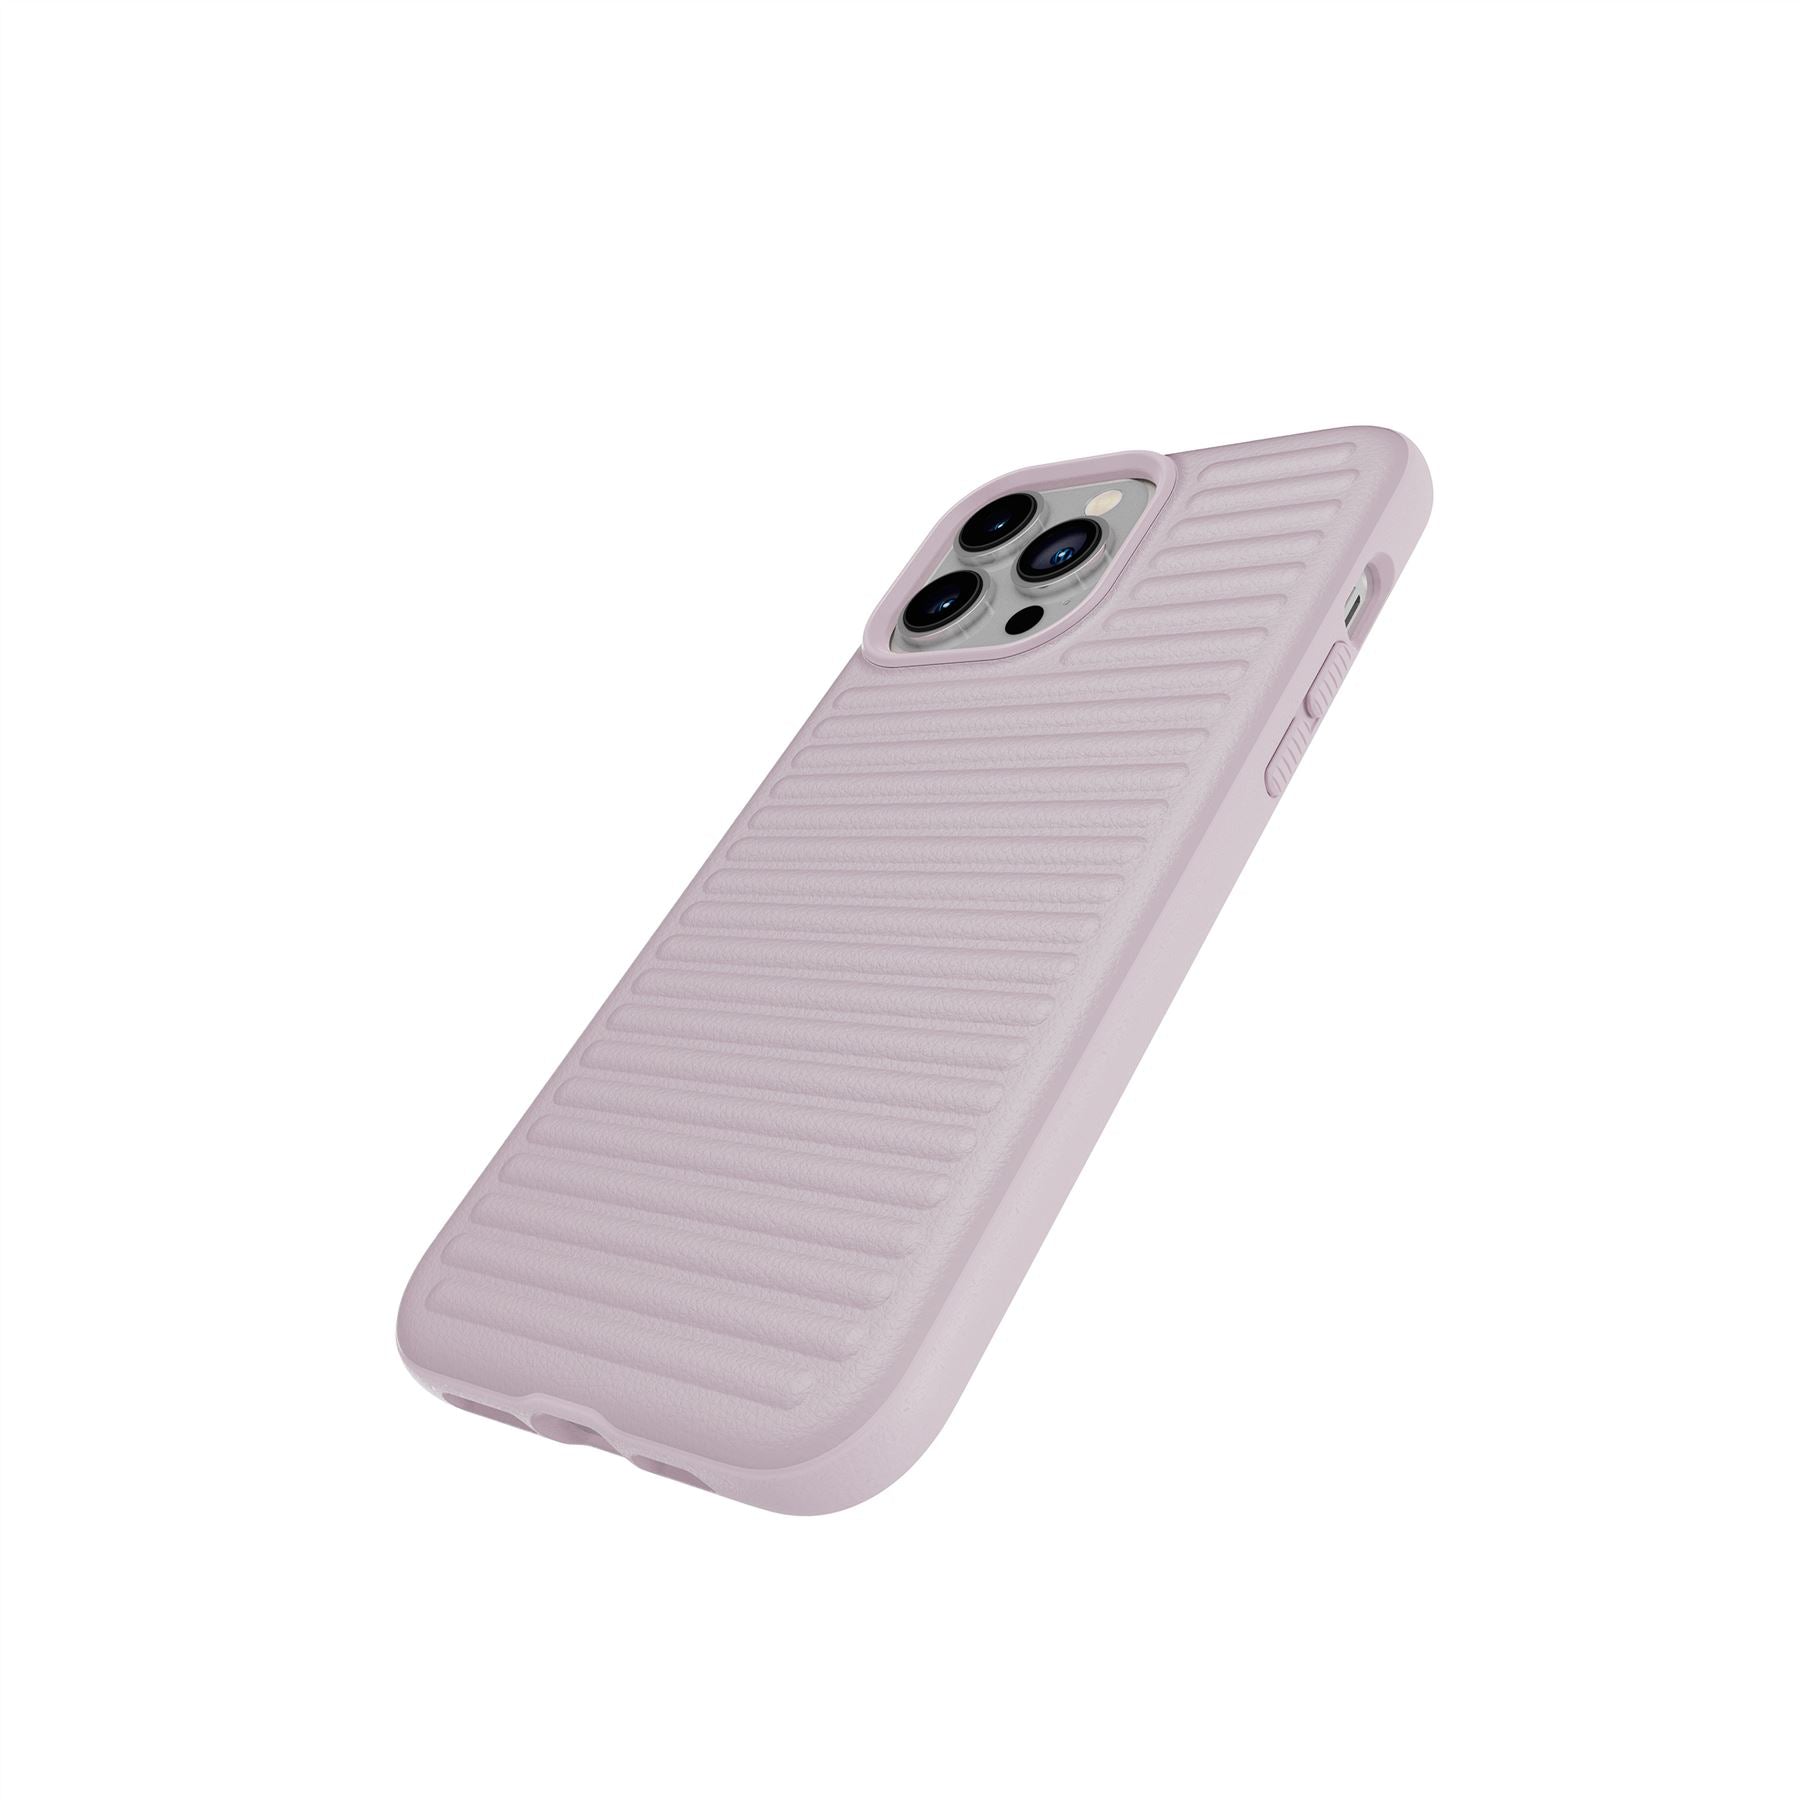 Evo Luxe - Apple iPhone 13 Pro Max Case - Dusty Pink